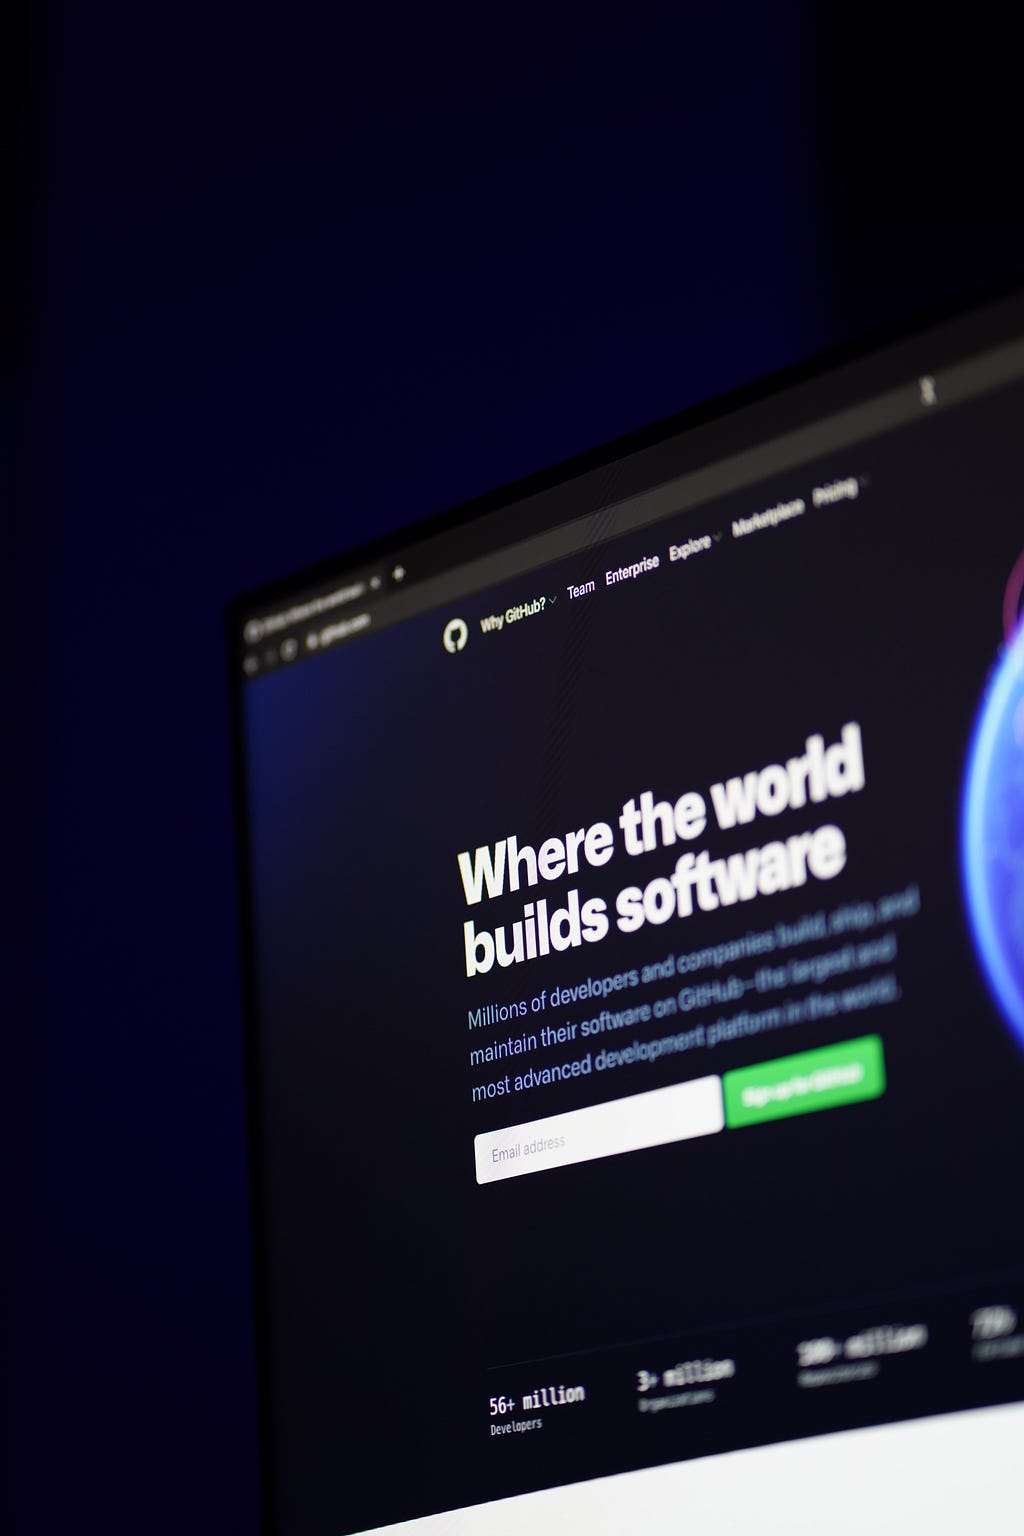 Github web page. the page header say : “Where the world build software”